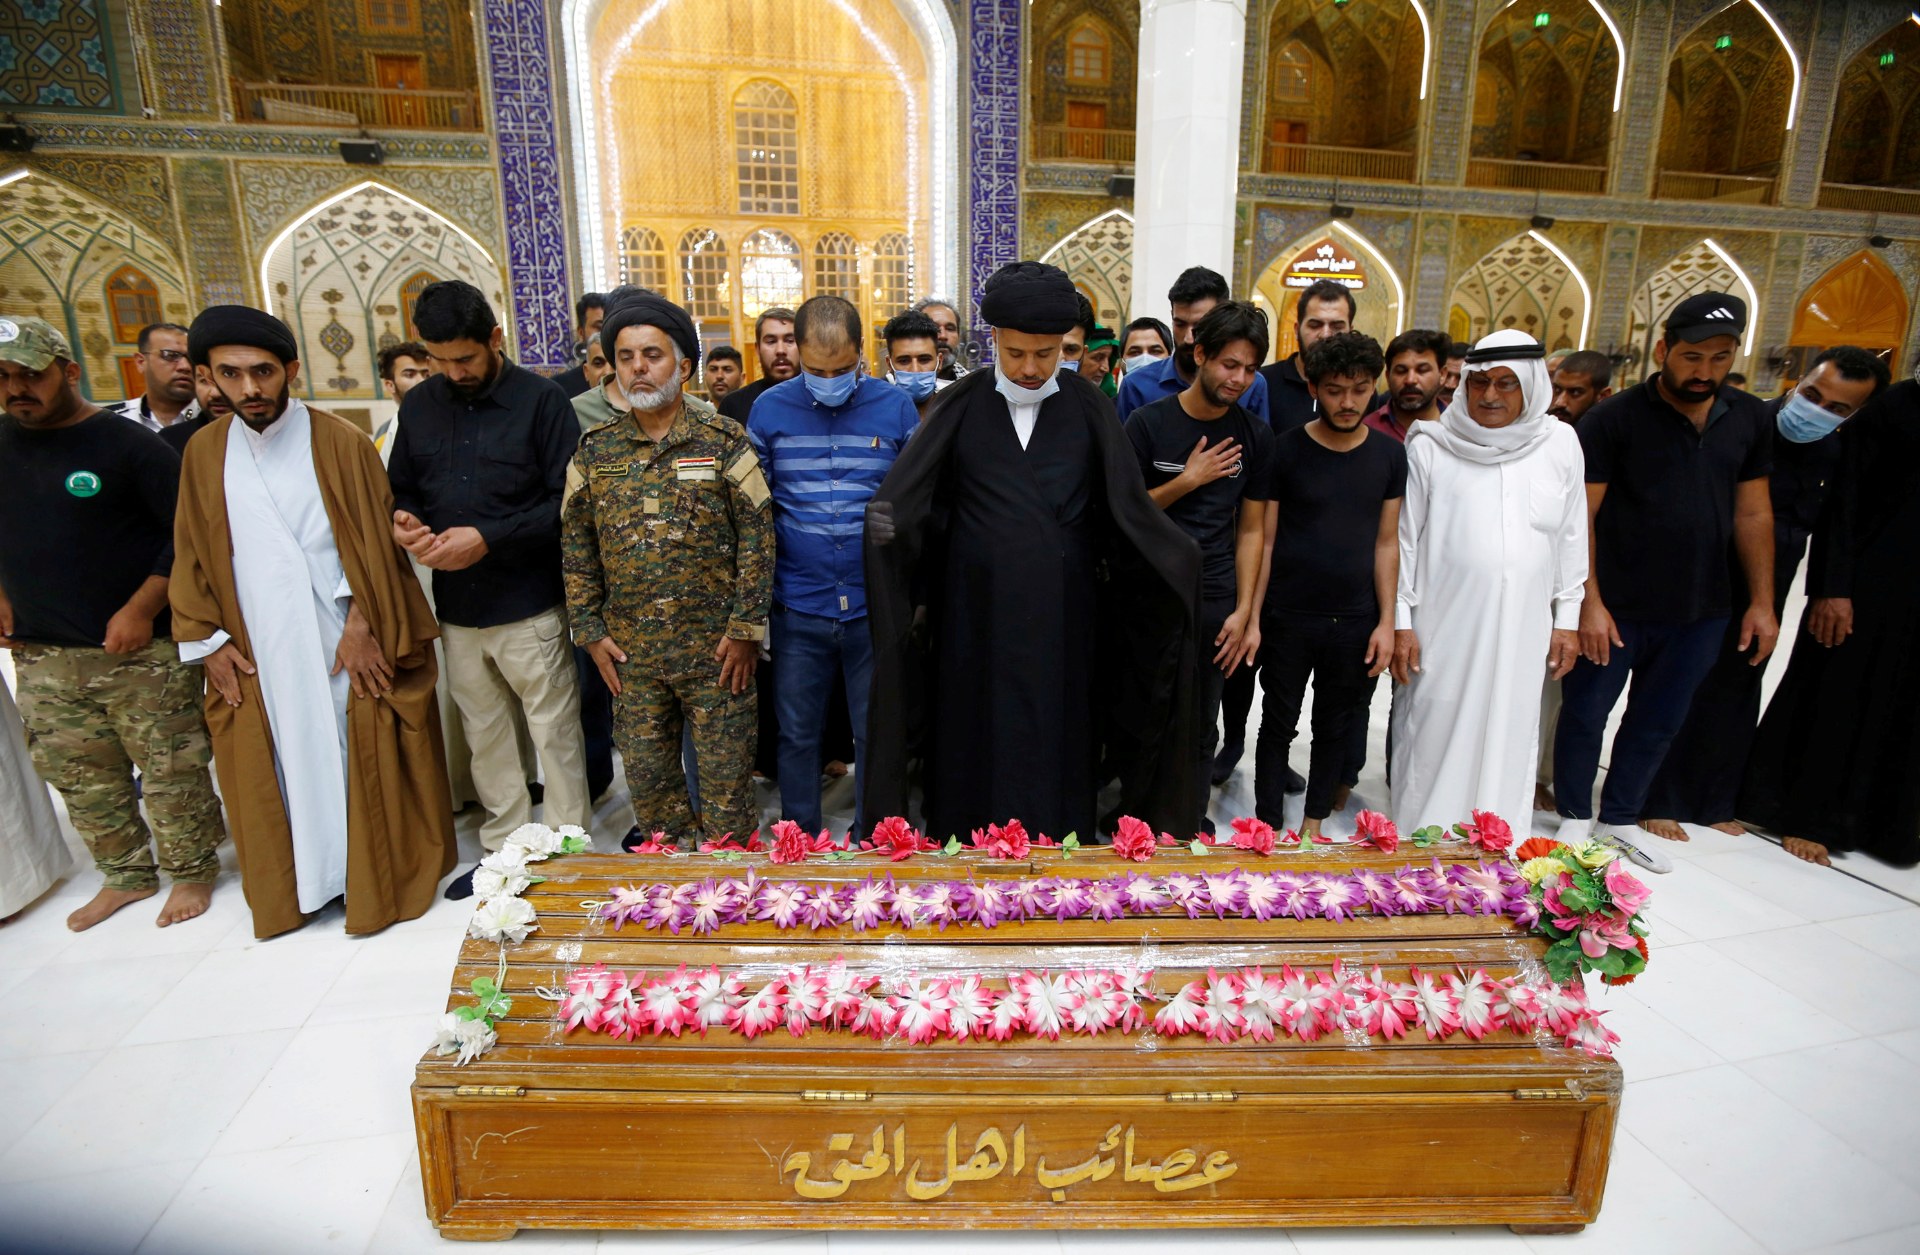 Mourners pray near the coffin of a member of the PMF, who was killed in clashes with Islamic State militants in Salah al-DIn province, during the funeral in the holy city of Najaf (Reuters)